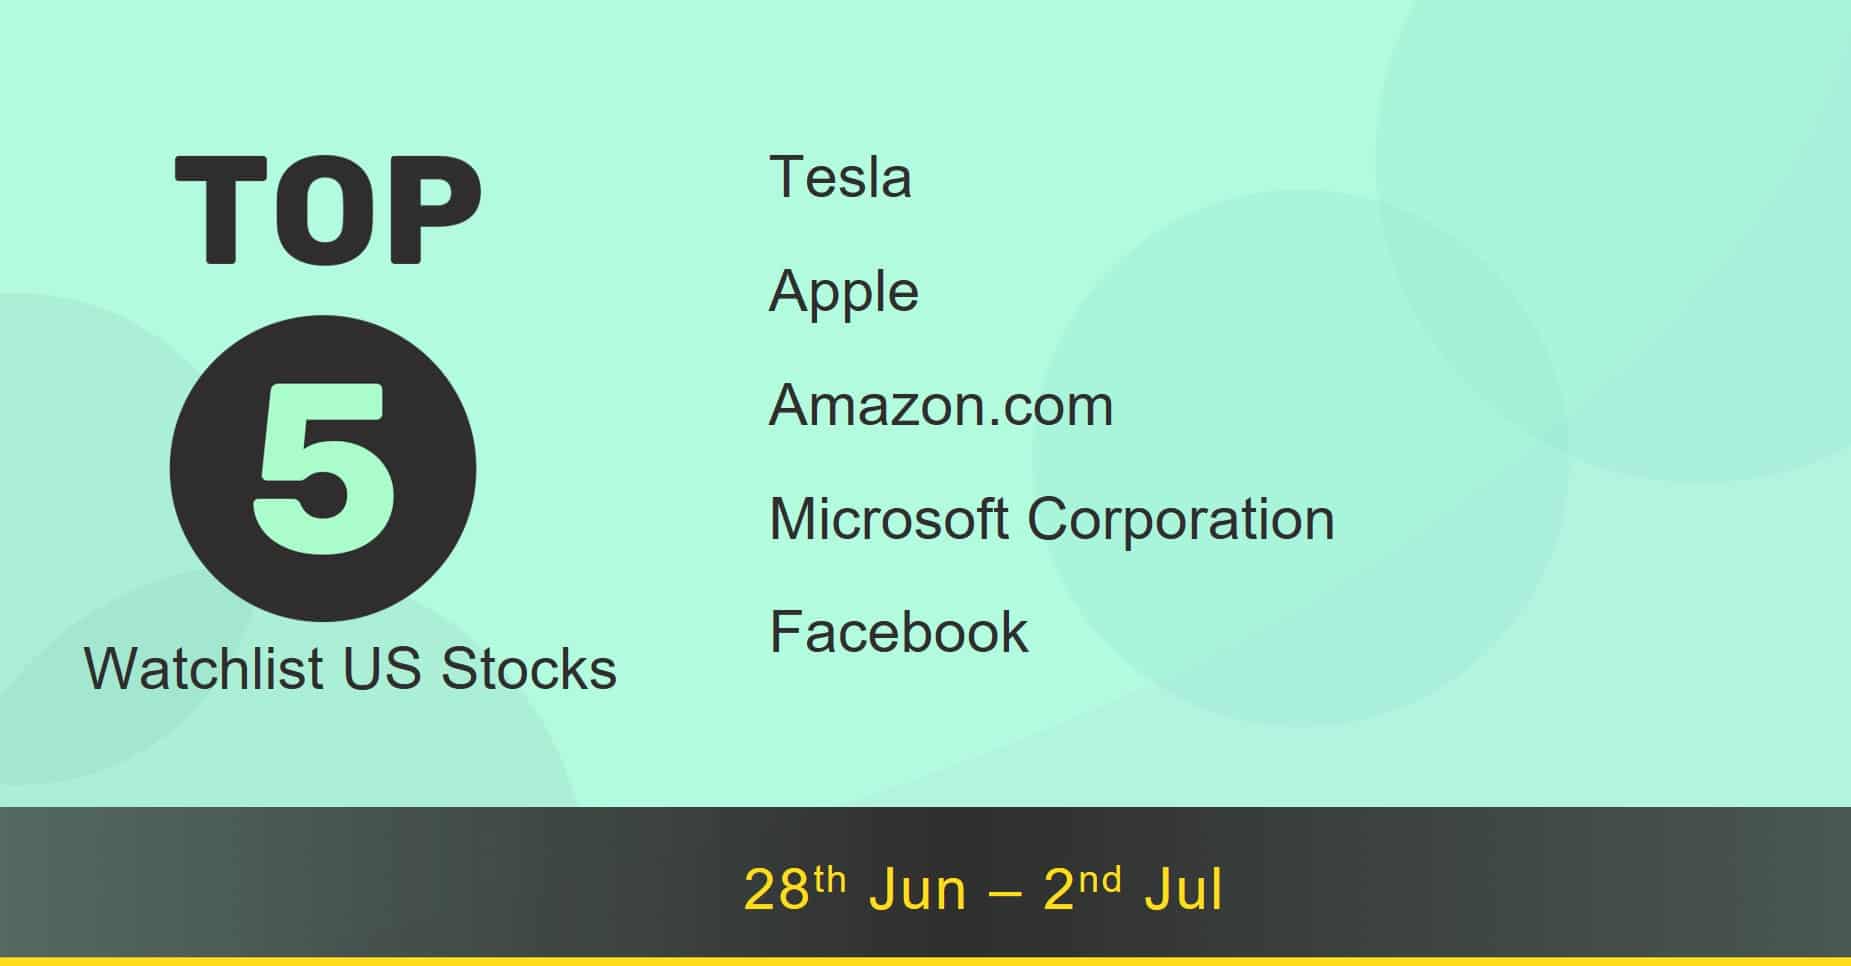 Top news and market movers ⚡ this week: 2nd Jul’ 21